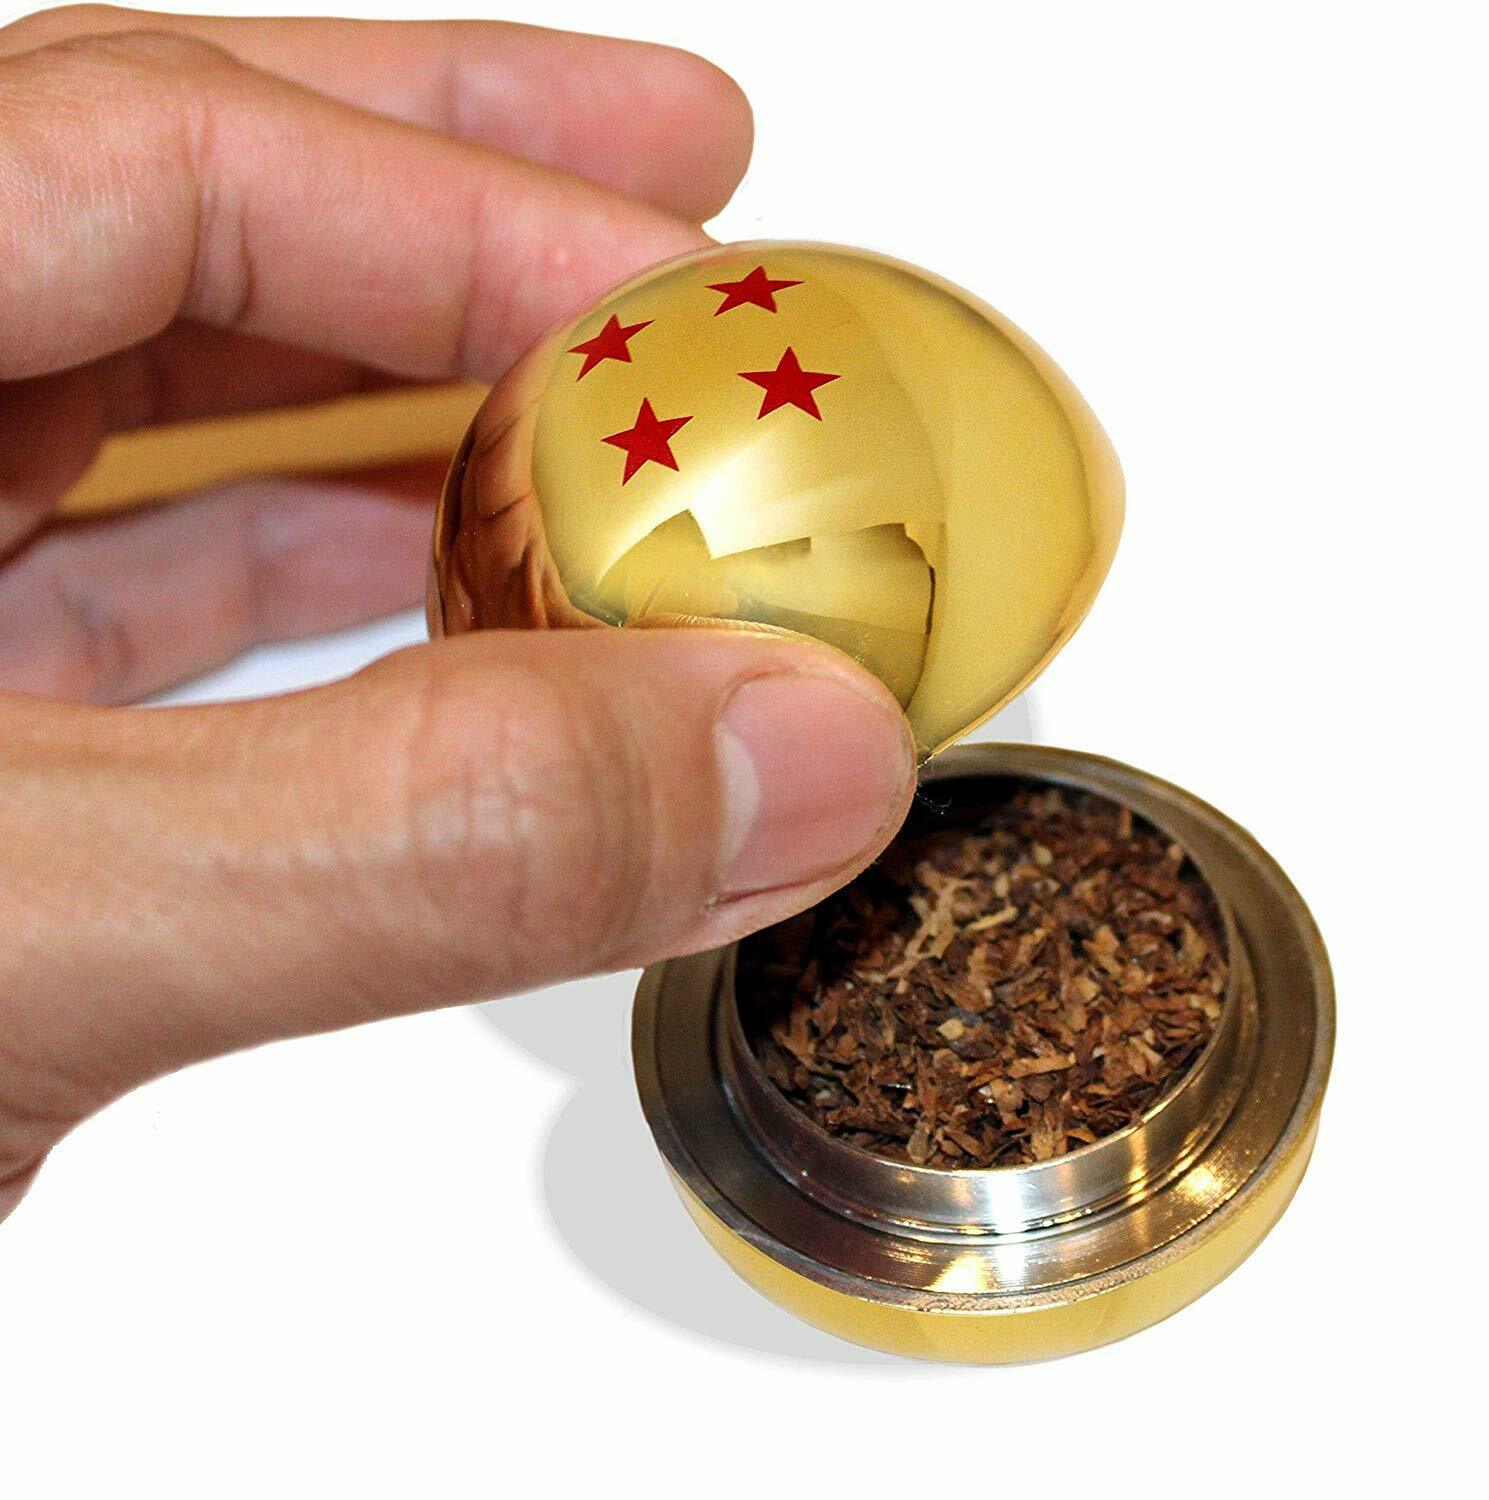 Dragon ball Z Herb Grinder3 Piece Grinder by 4 Star Smoke with black gift box 